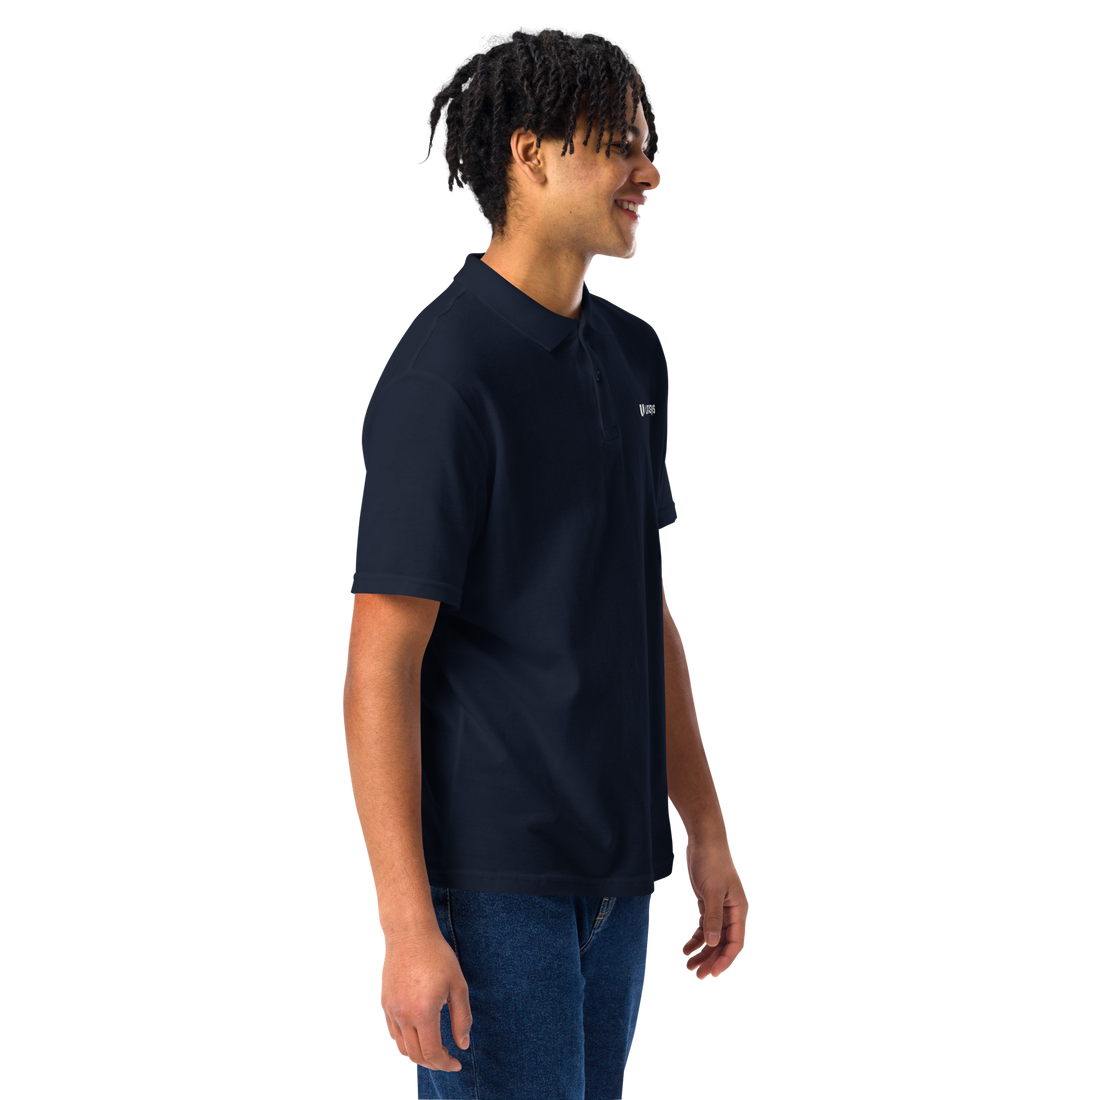 Unisex Embroidered Pique Polo Shirt